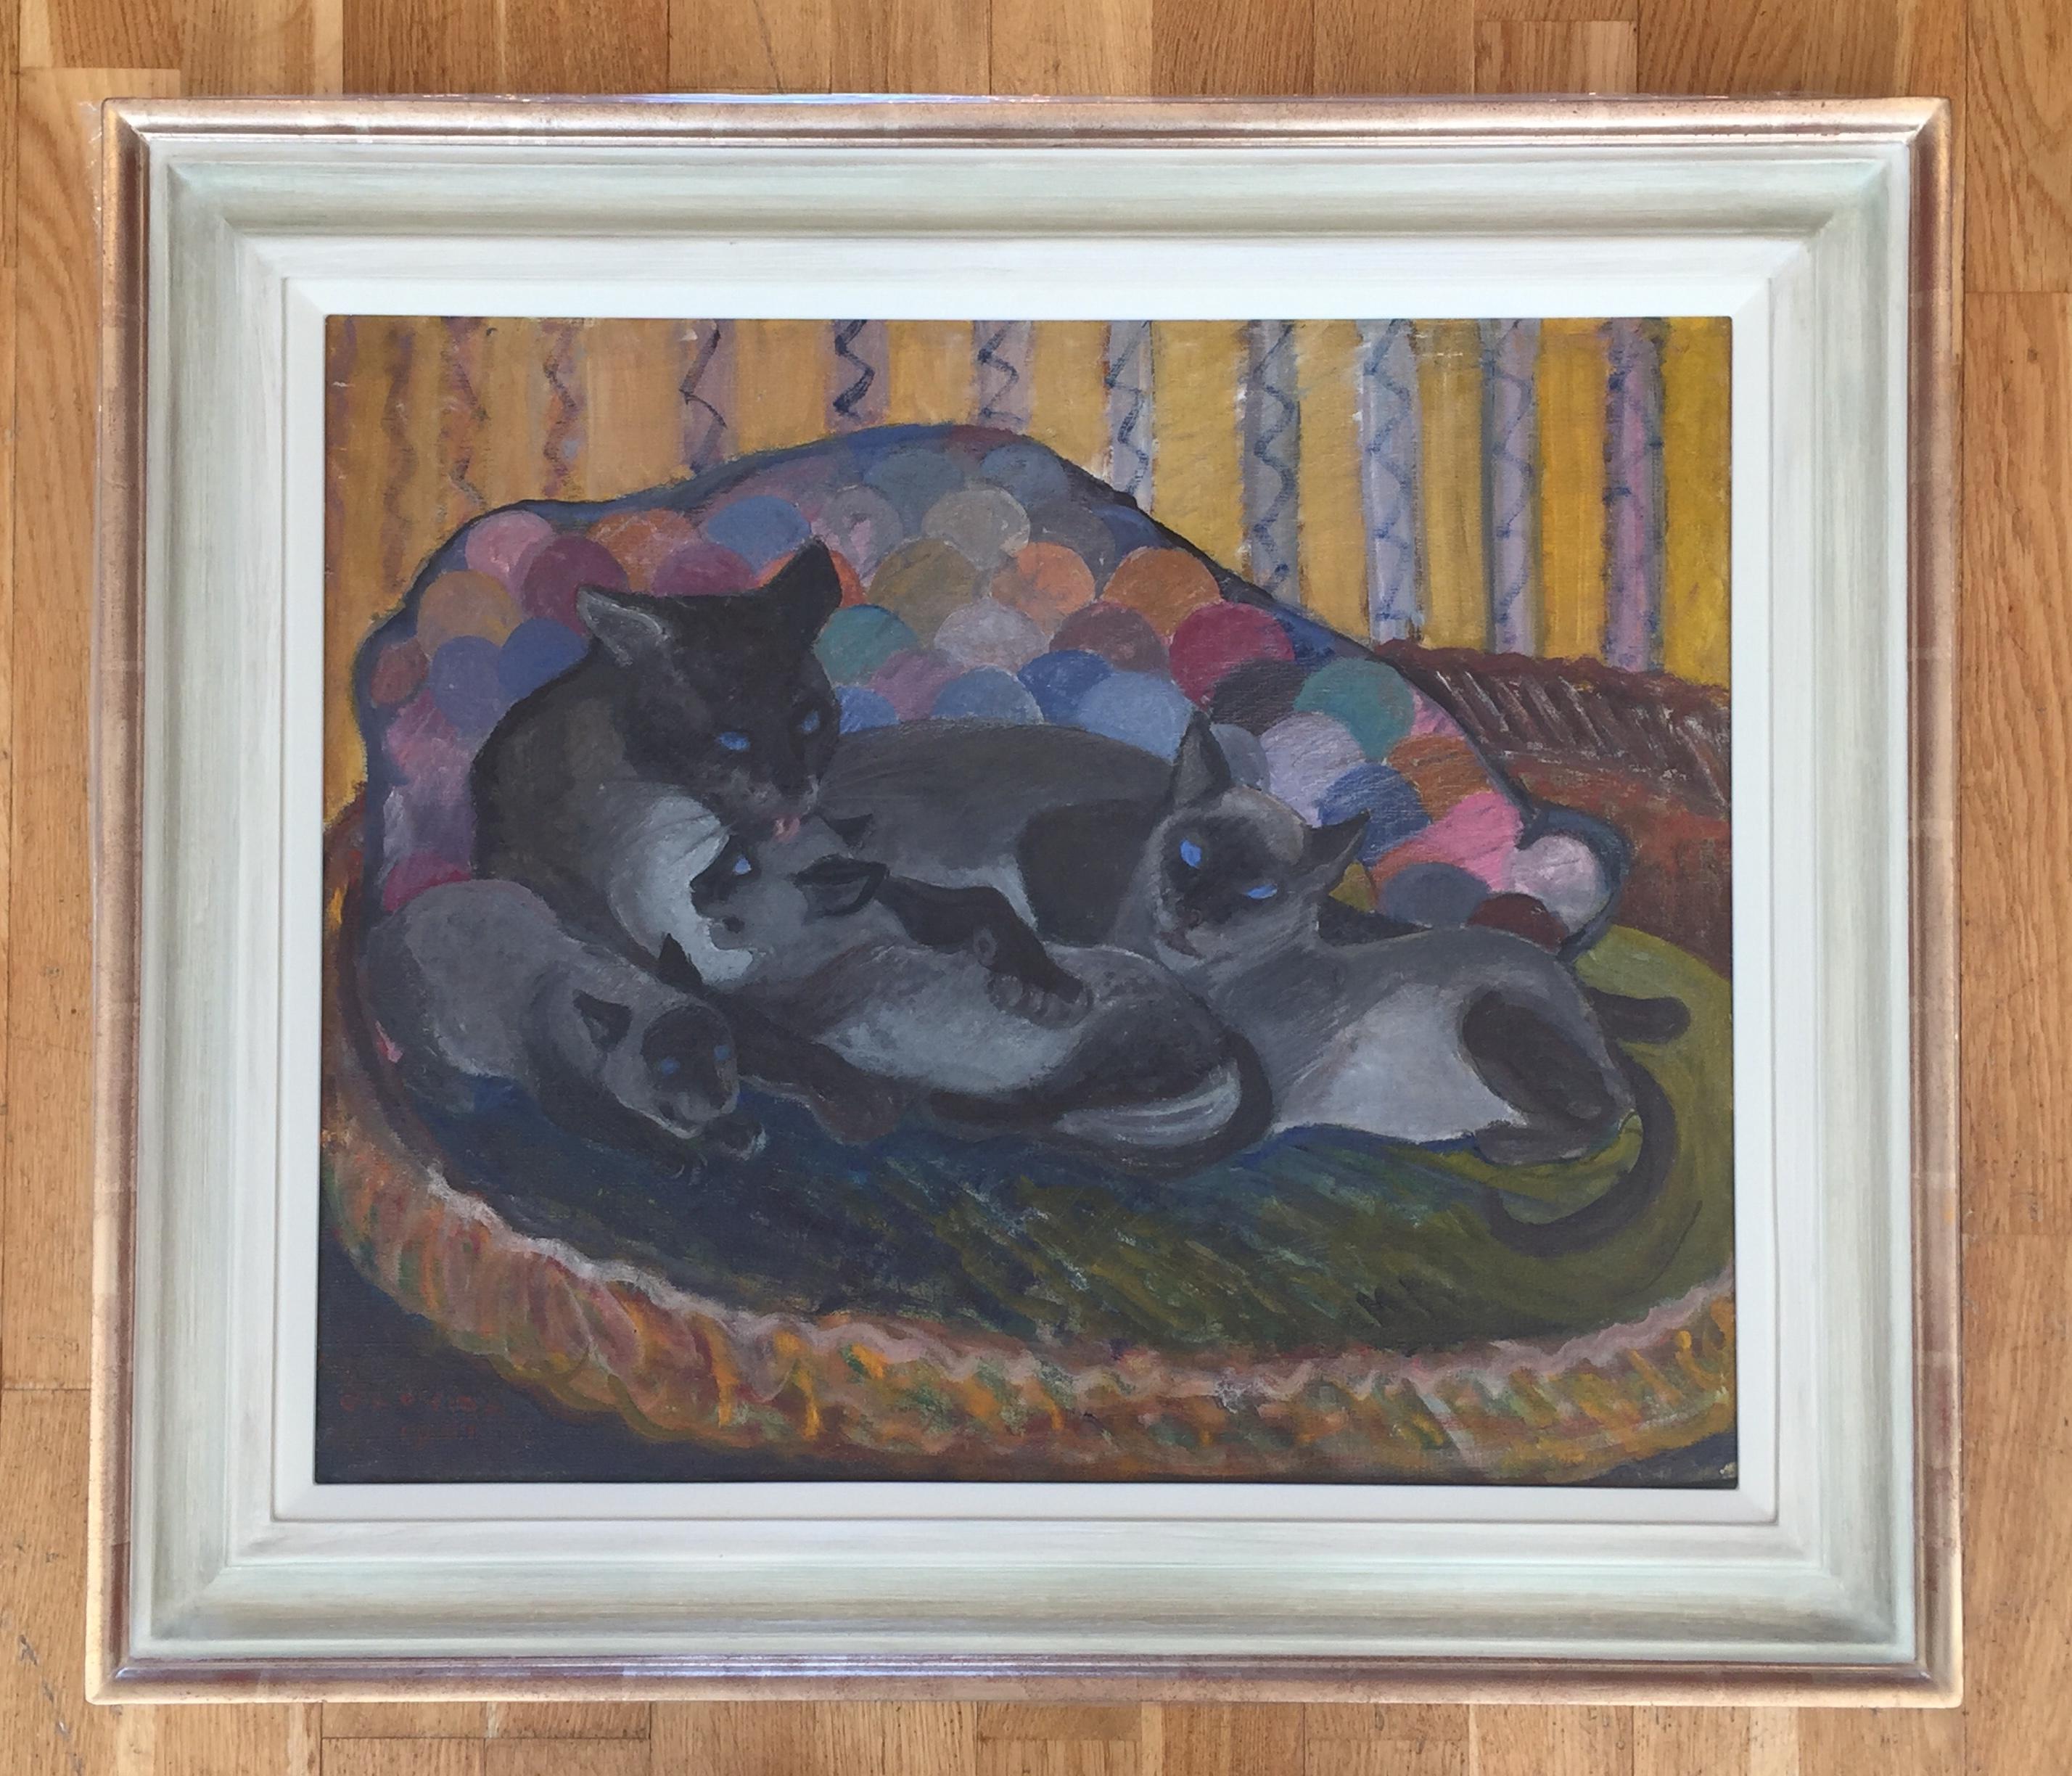 Siamese cat + kittens, oil on canvas 1961, by Orovida Pissarro, + authentication im Angebot 2